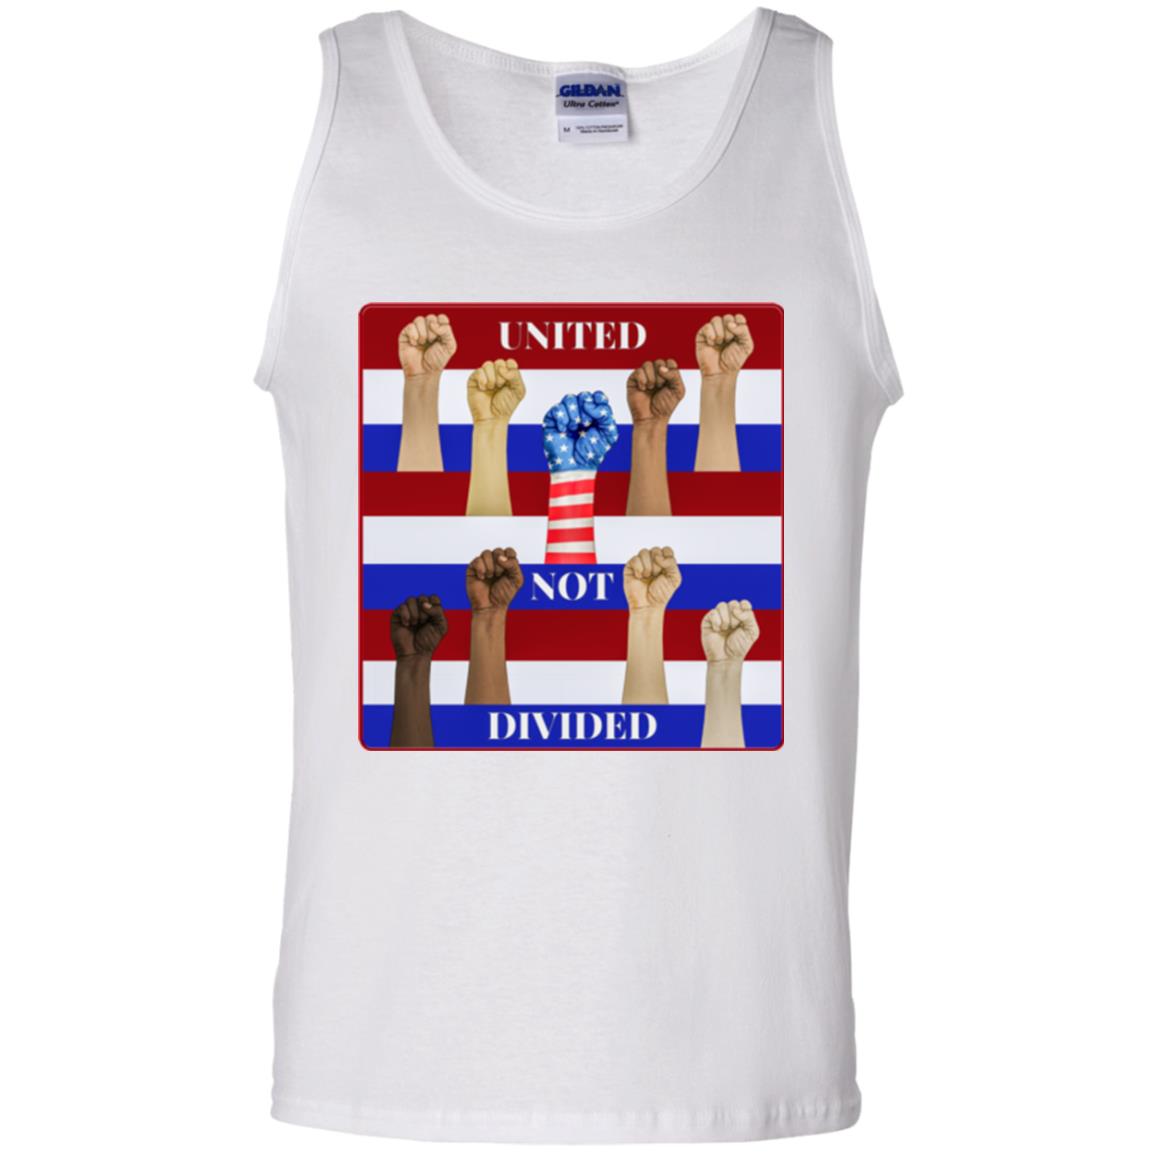 united not divided - Men's Tank Top